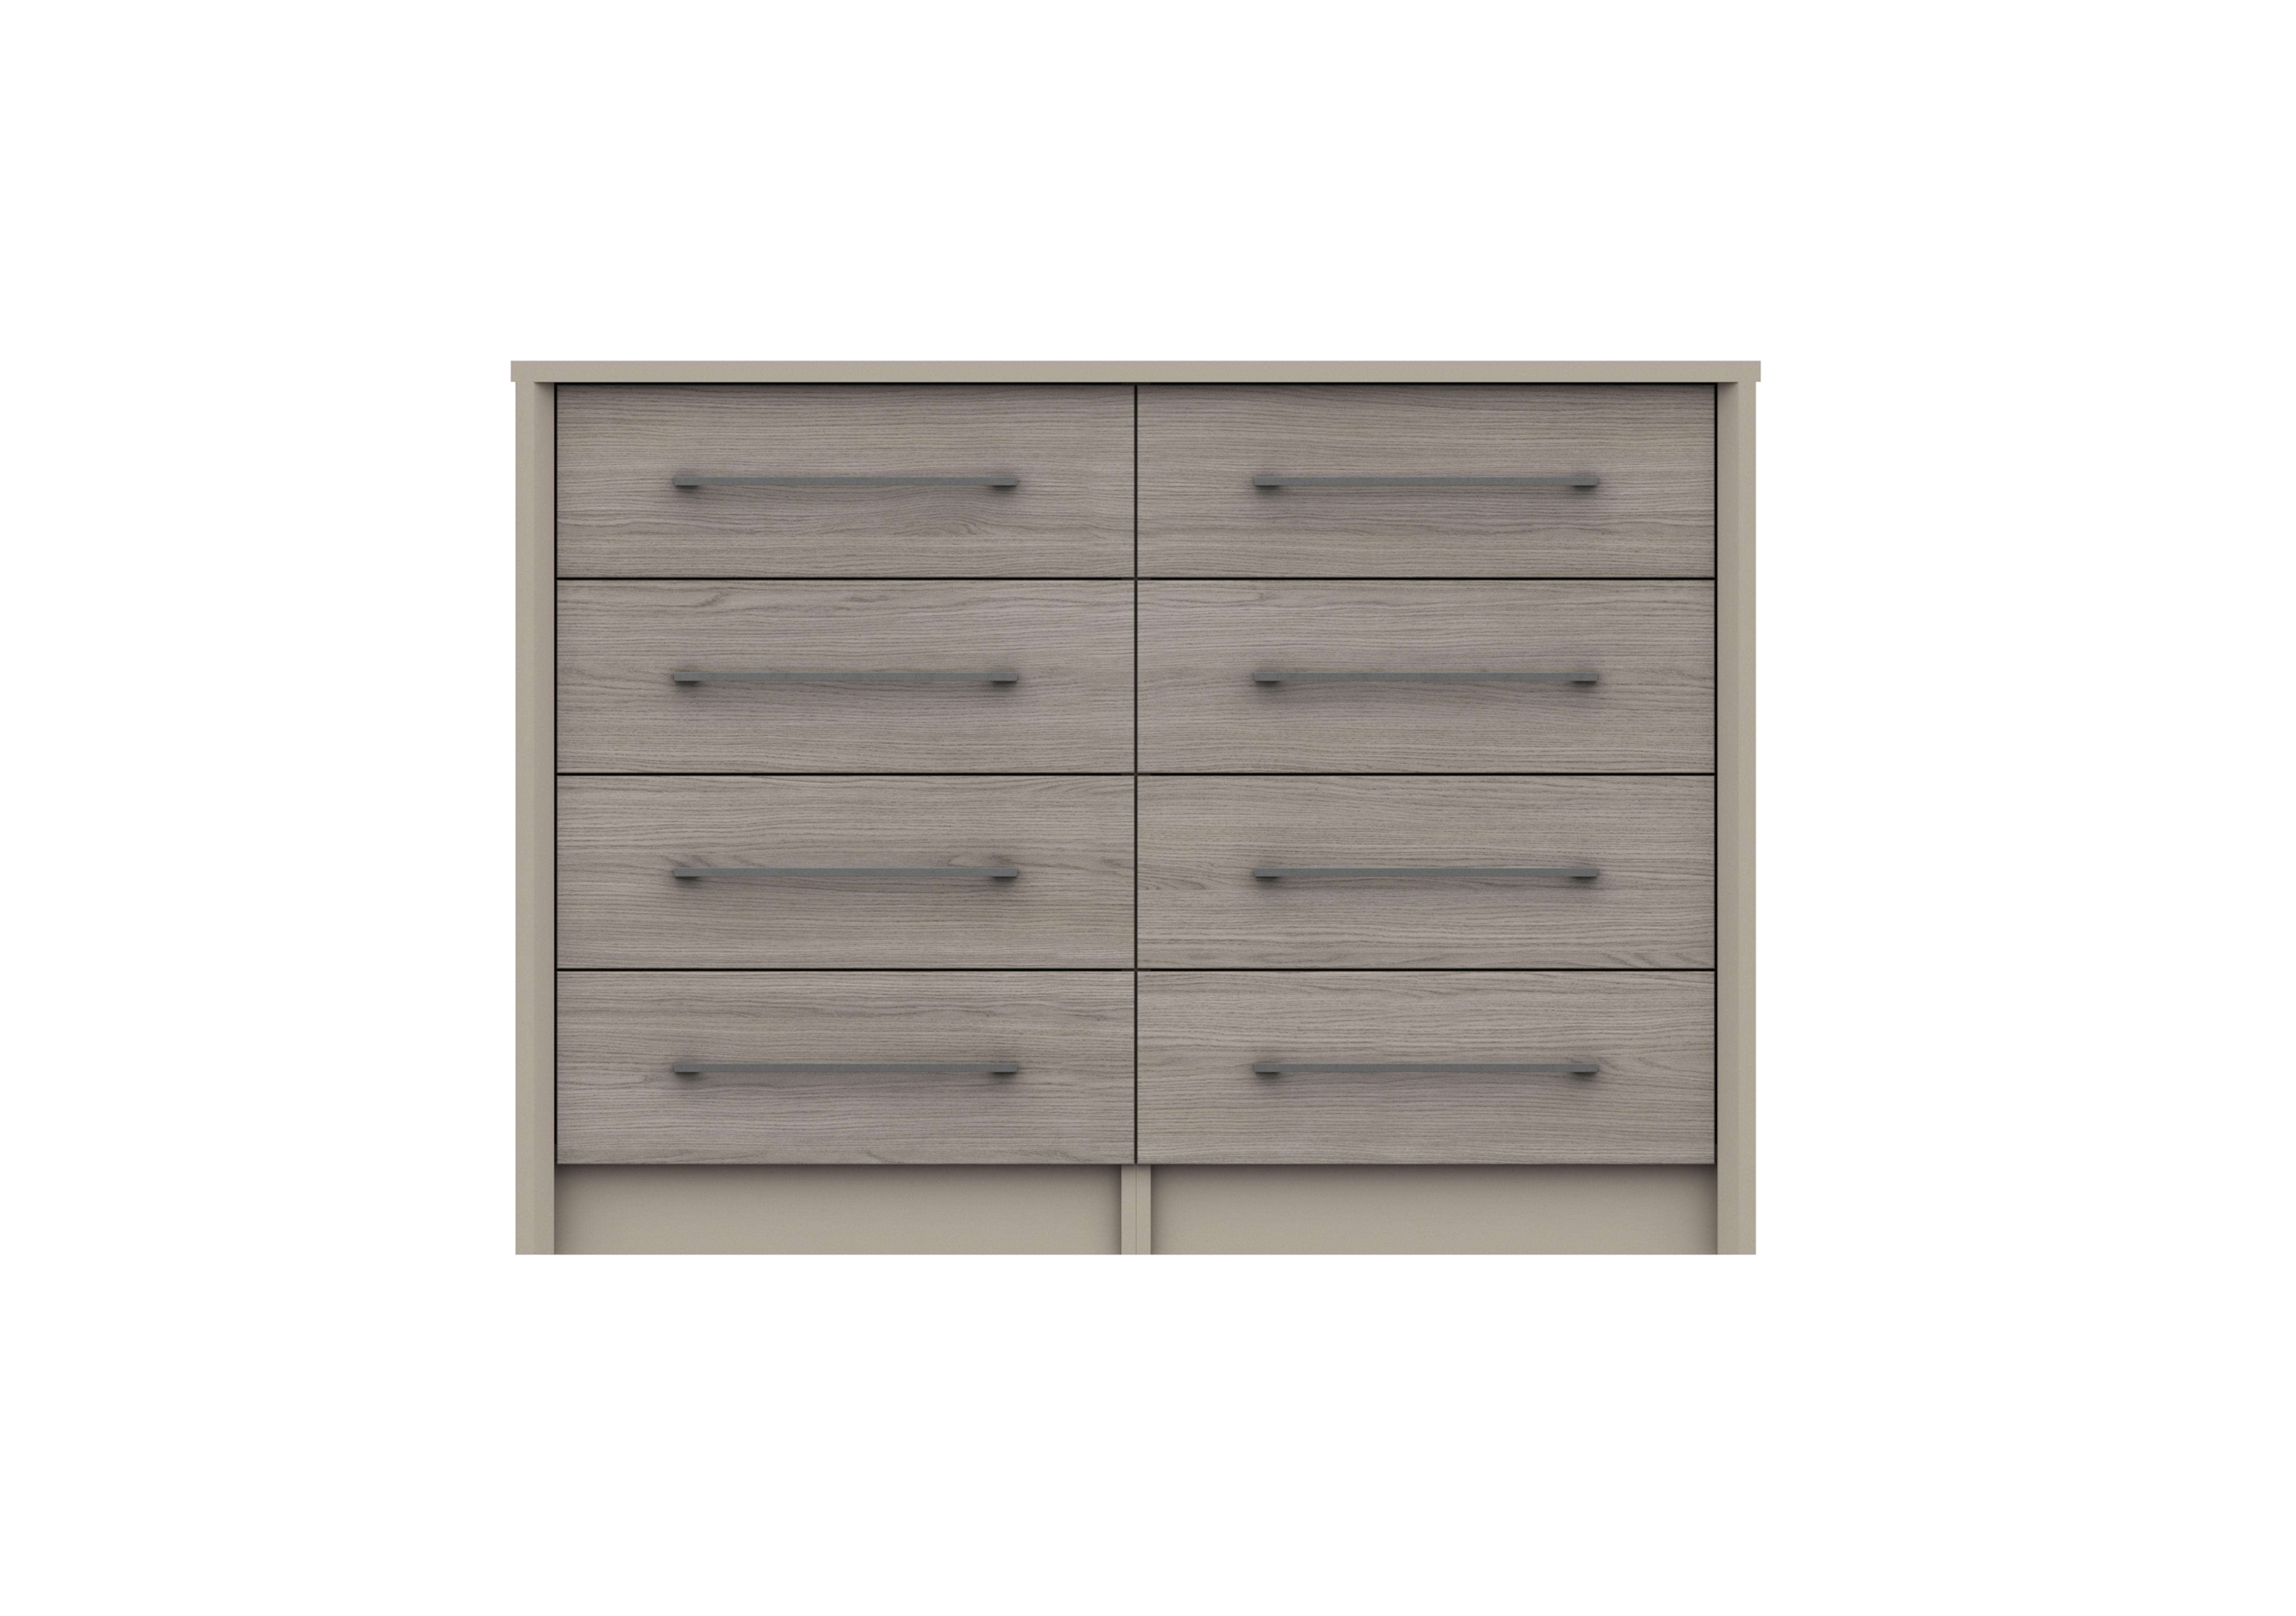 Paddington 8 Drawer Wide Chest in Fired Earth/Grey Oak on Furniture Village